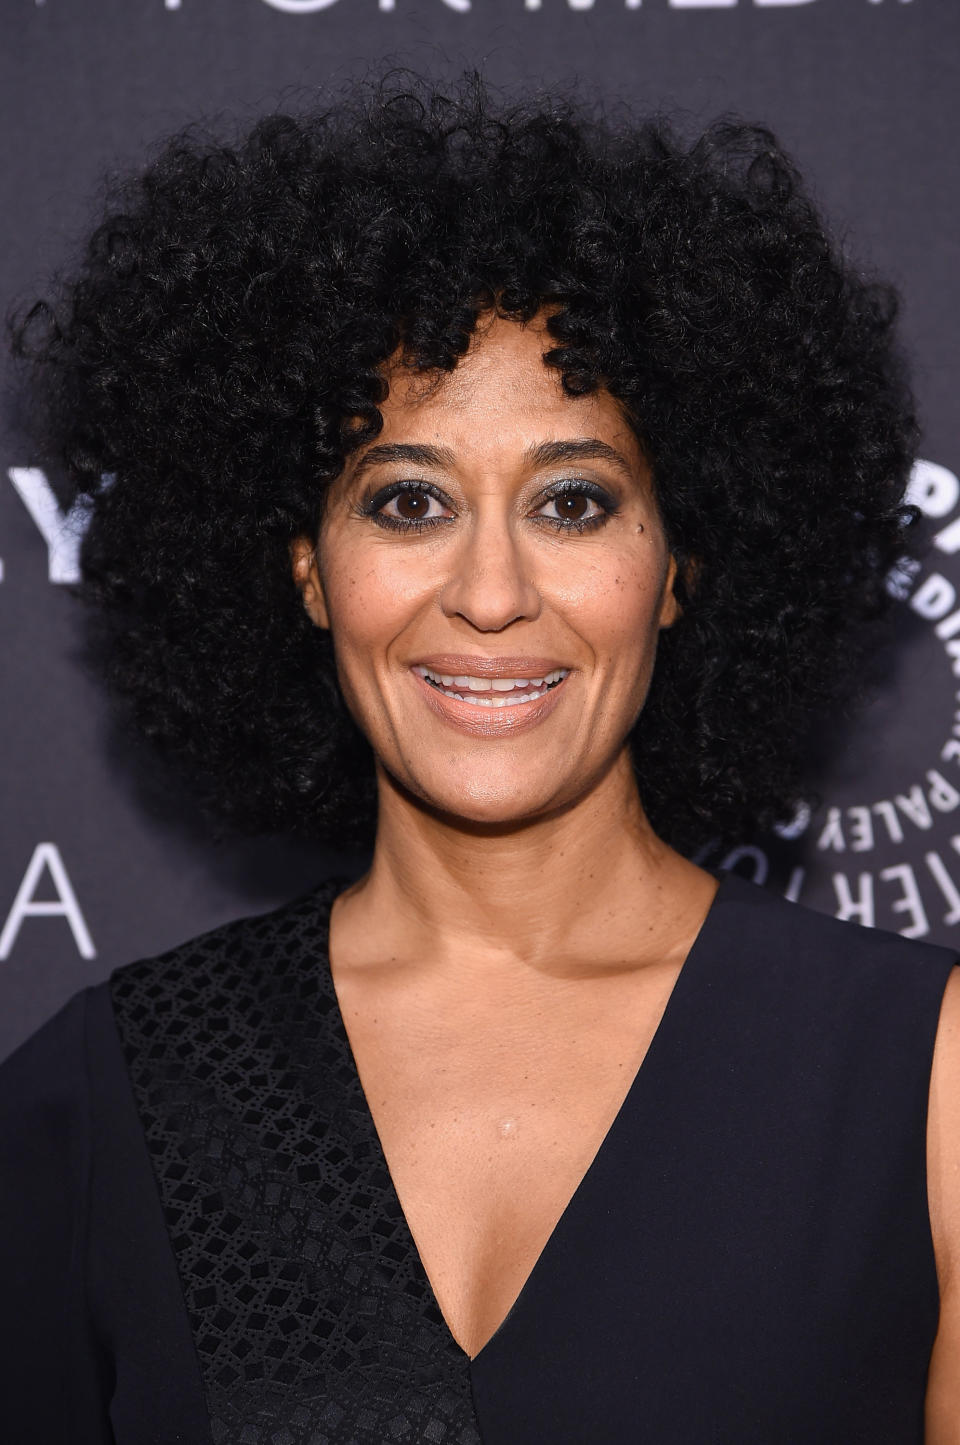 NEW YORK, NY - MAY 13:  Actress Tracee Ellis Ross attends A Tribute To African-American Achievements In Television hosted by The Paley Center For Media at Cipriani Wall Street on May 13, 2015 in New York City.  (Photo by Mike Coppola/Getty Images)